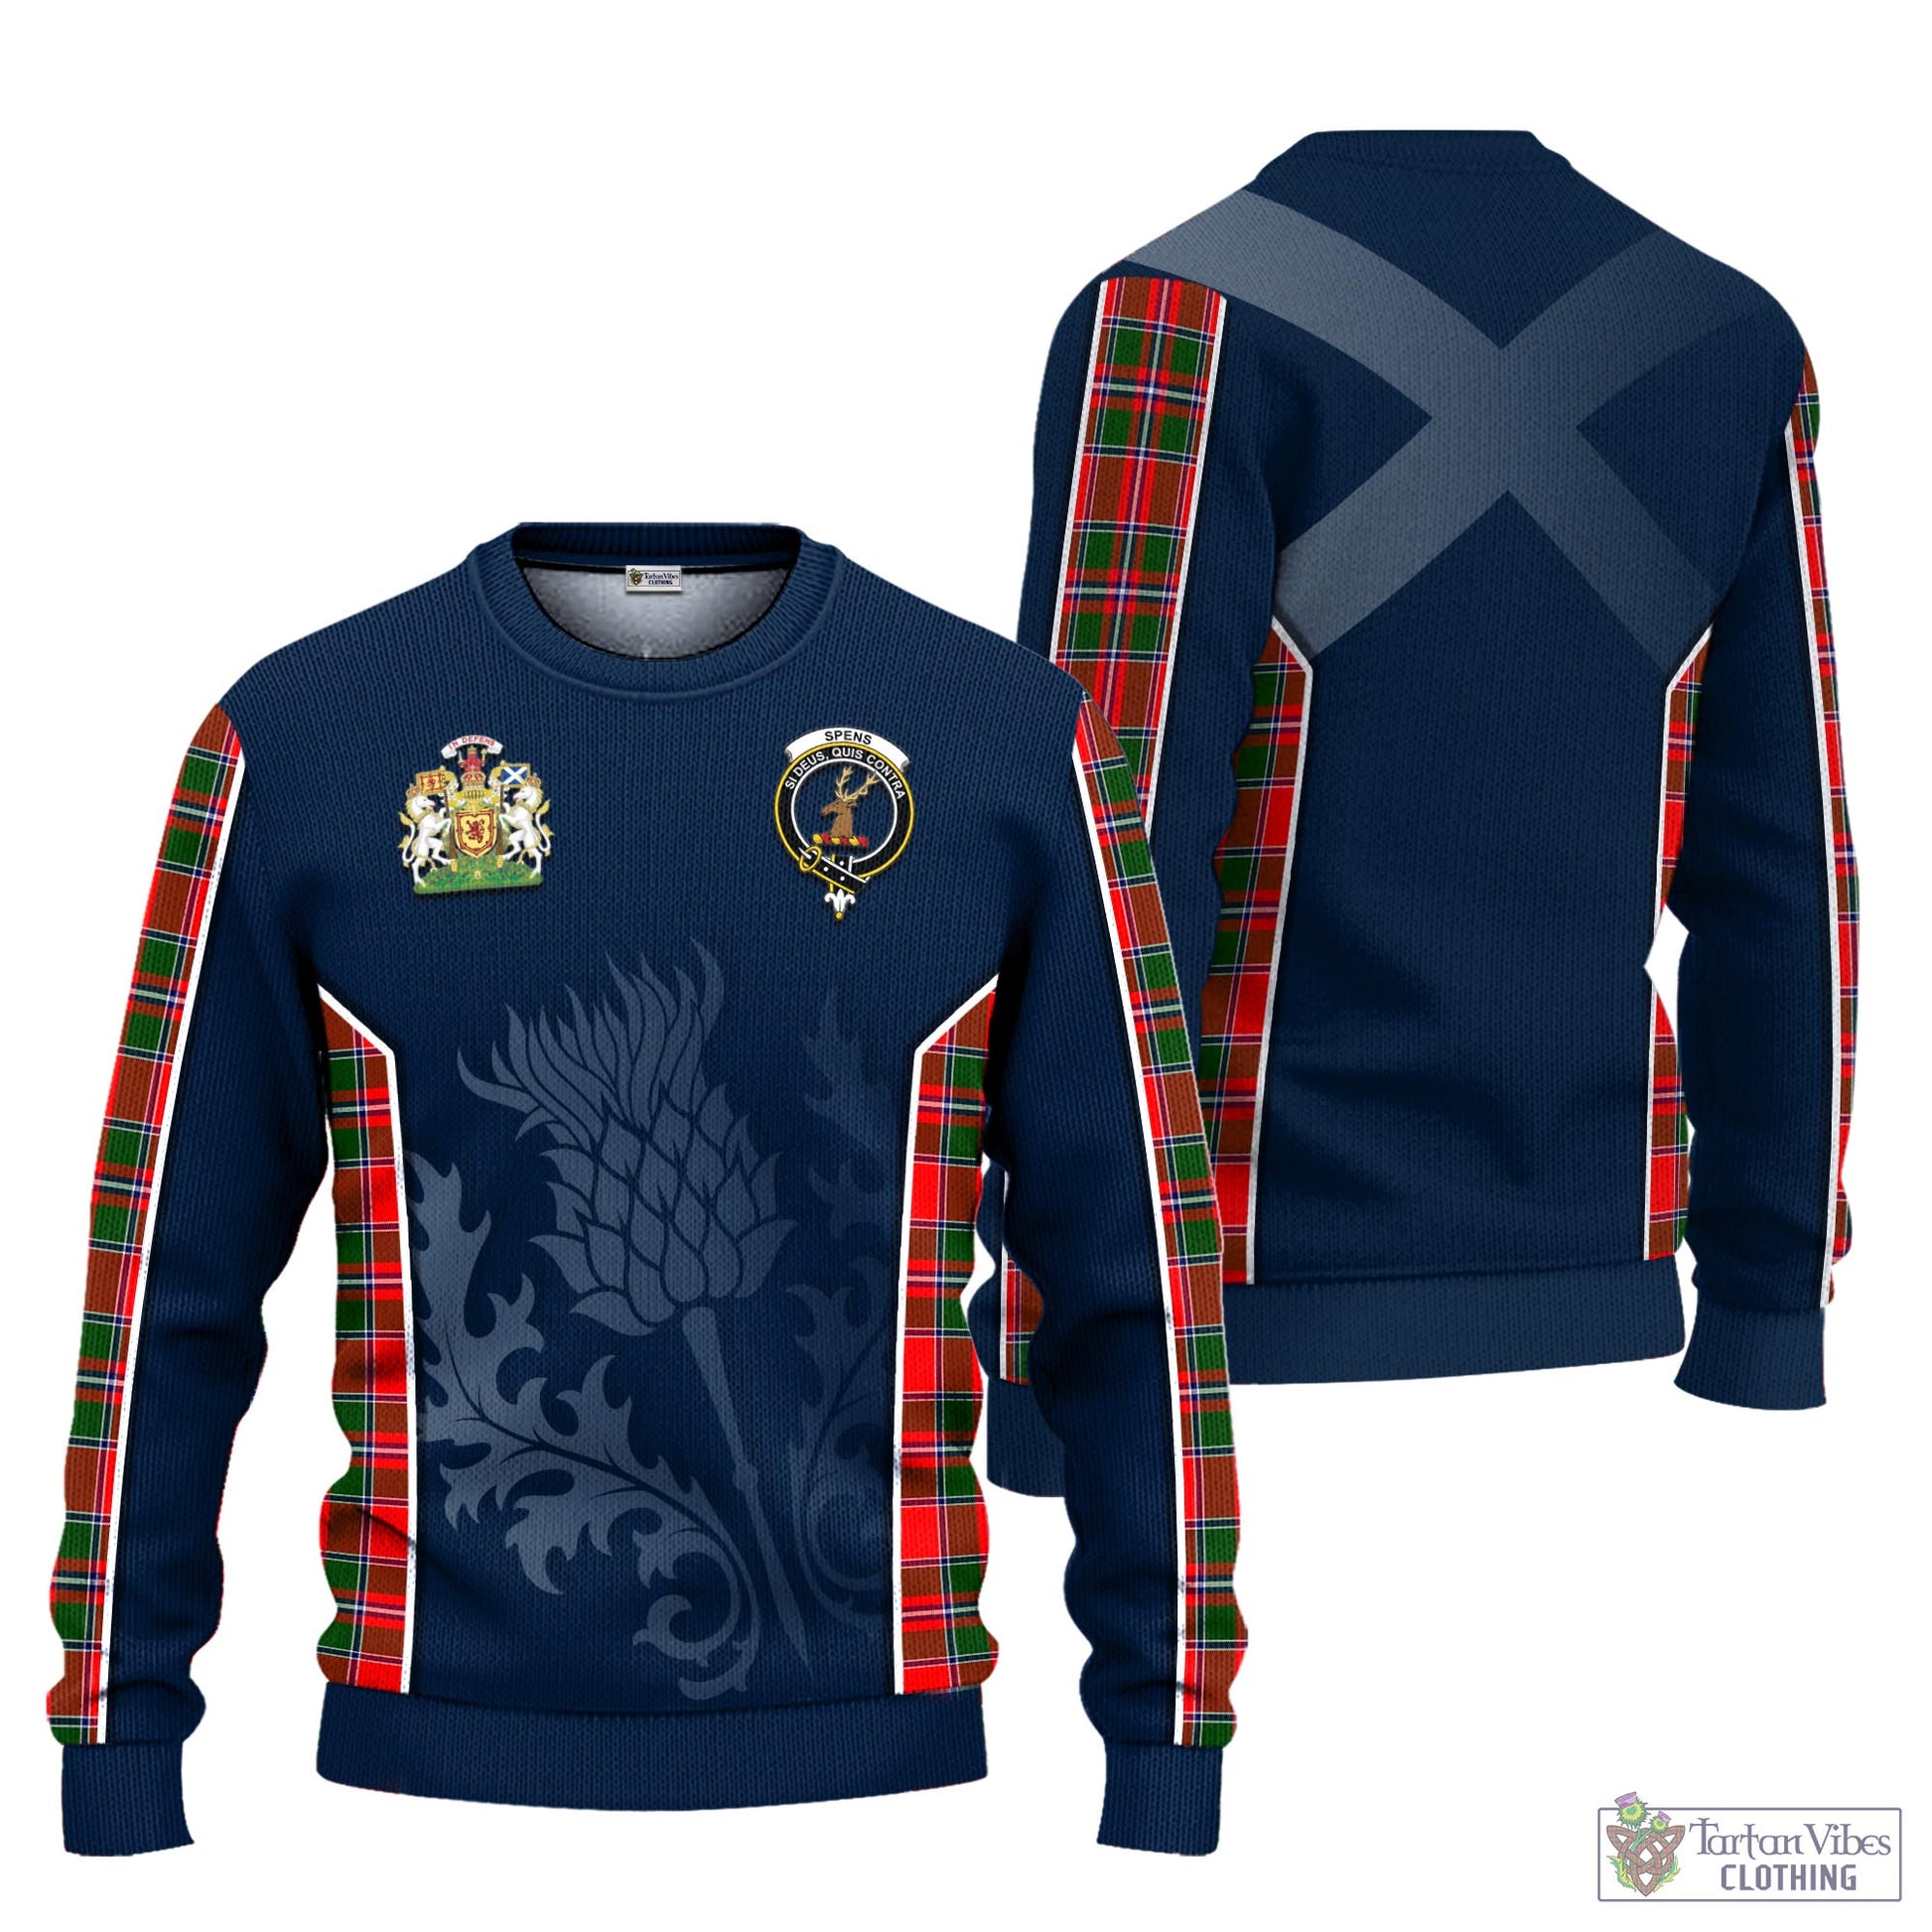 Tartan Vibes Clothing Spens Modern Tartan Knitted Sweatshirt with Family Crest and Scottish Thistle Vibes Sport Style